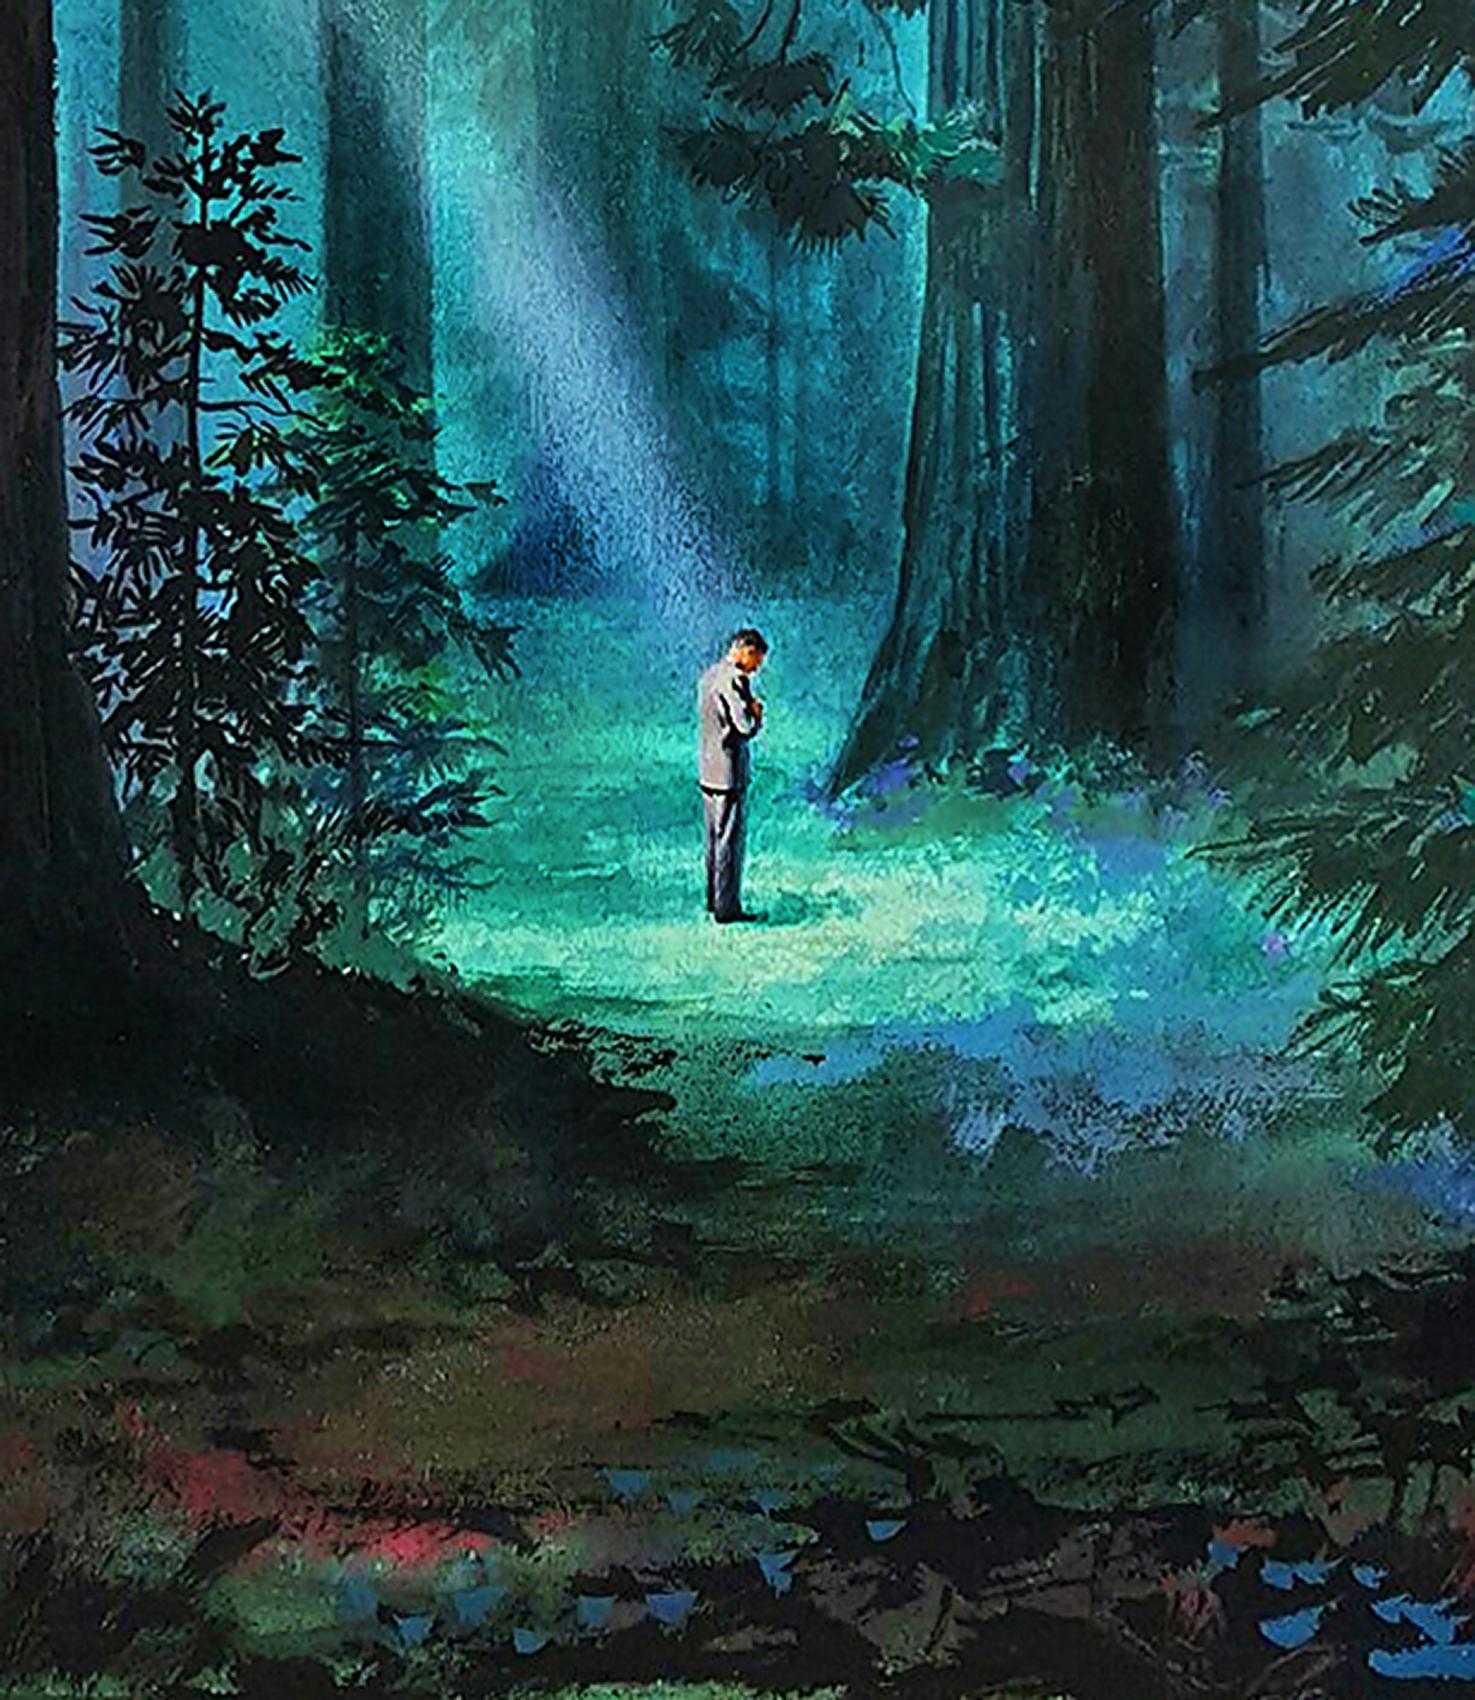 A ray of light in the forest - Solitary Man Surreal Landscape  - Painting by Hector Garrido